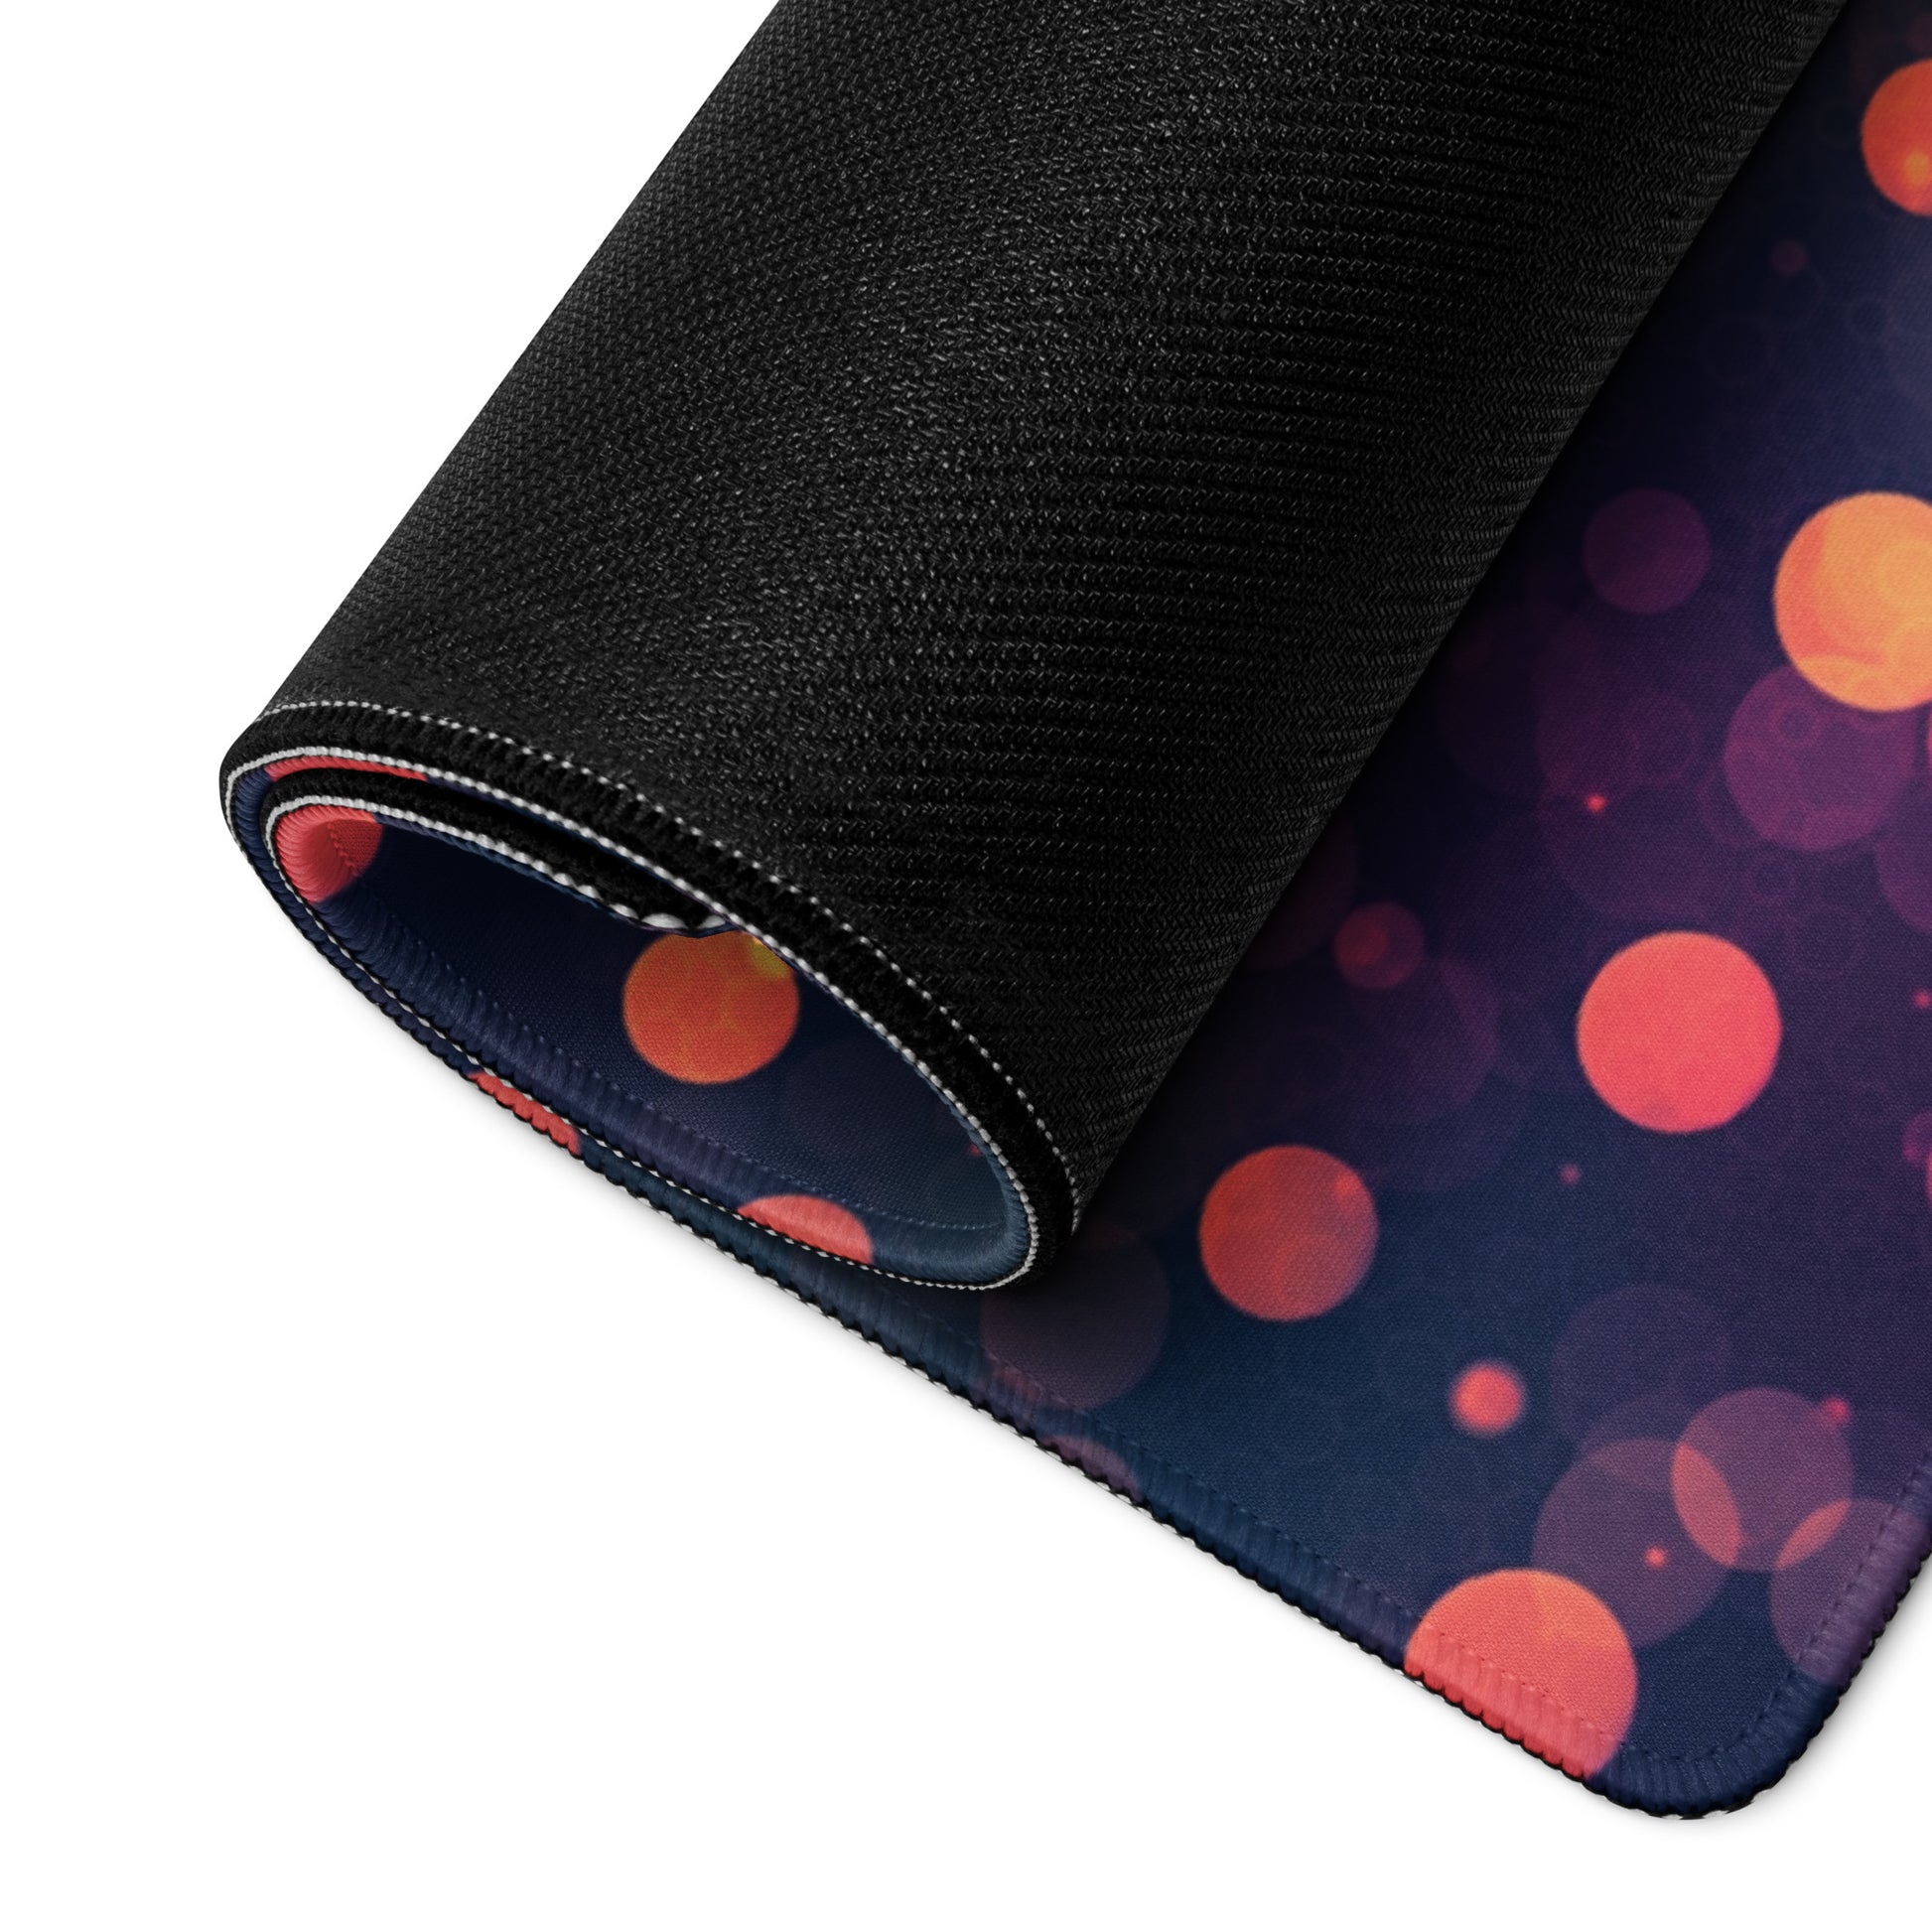 A 36" x 18" desk pad with a purple and red polka dot pattern rolled up.